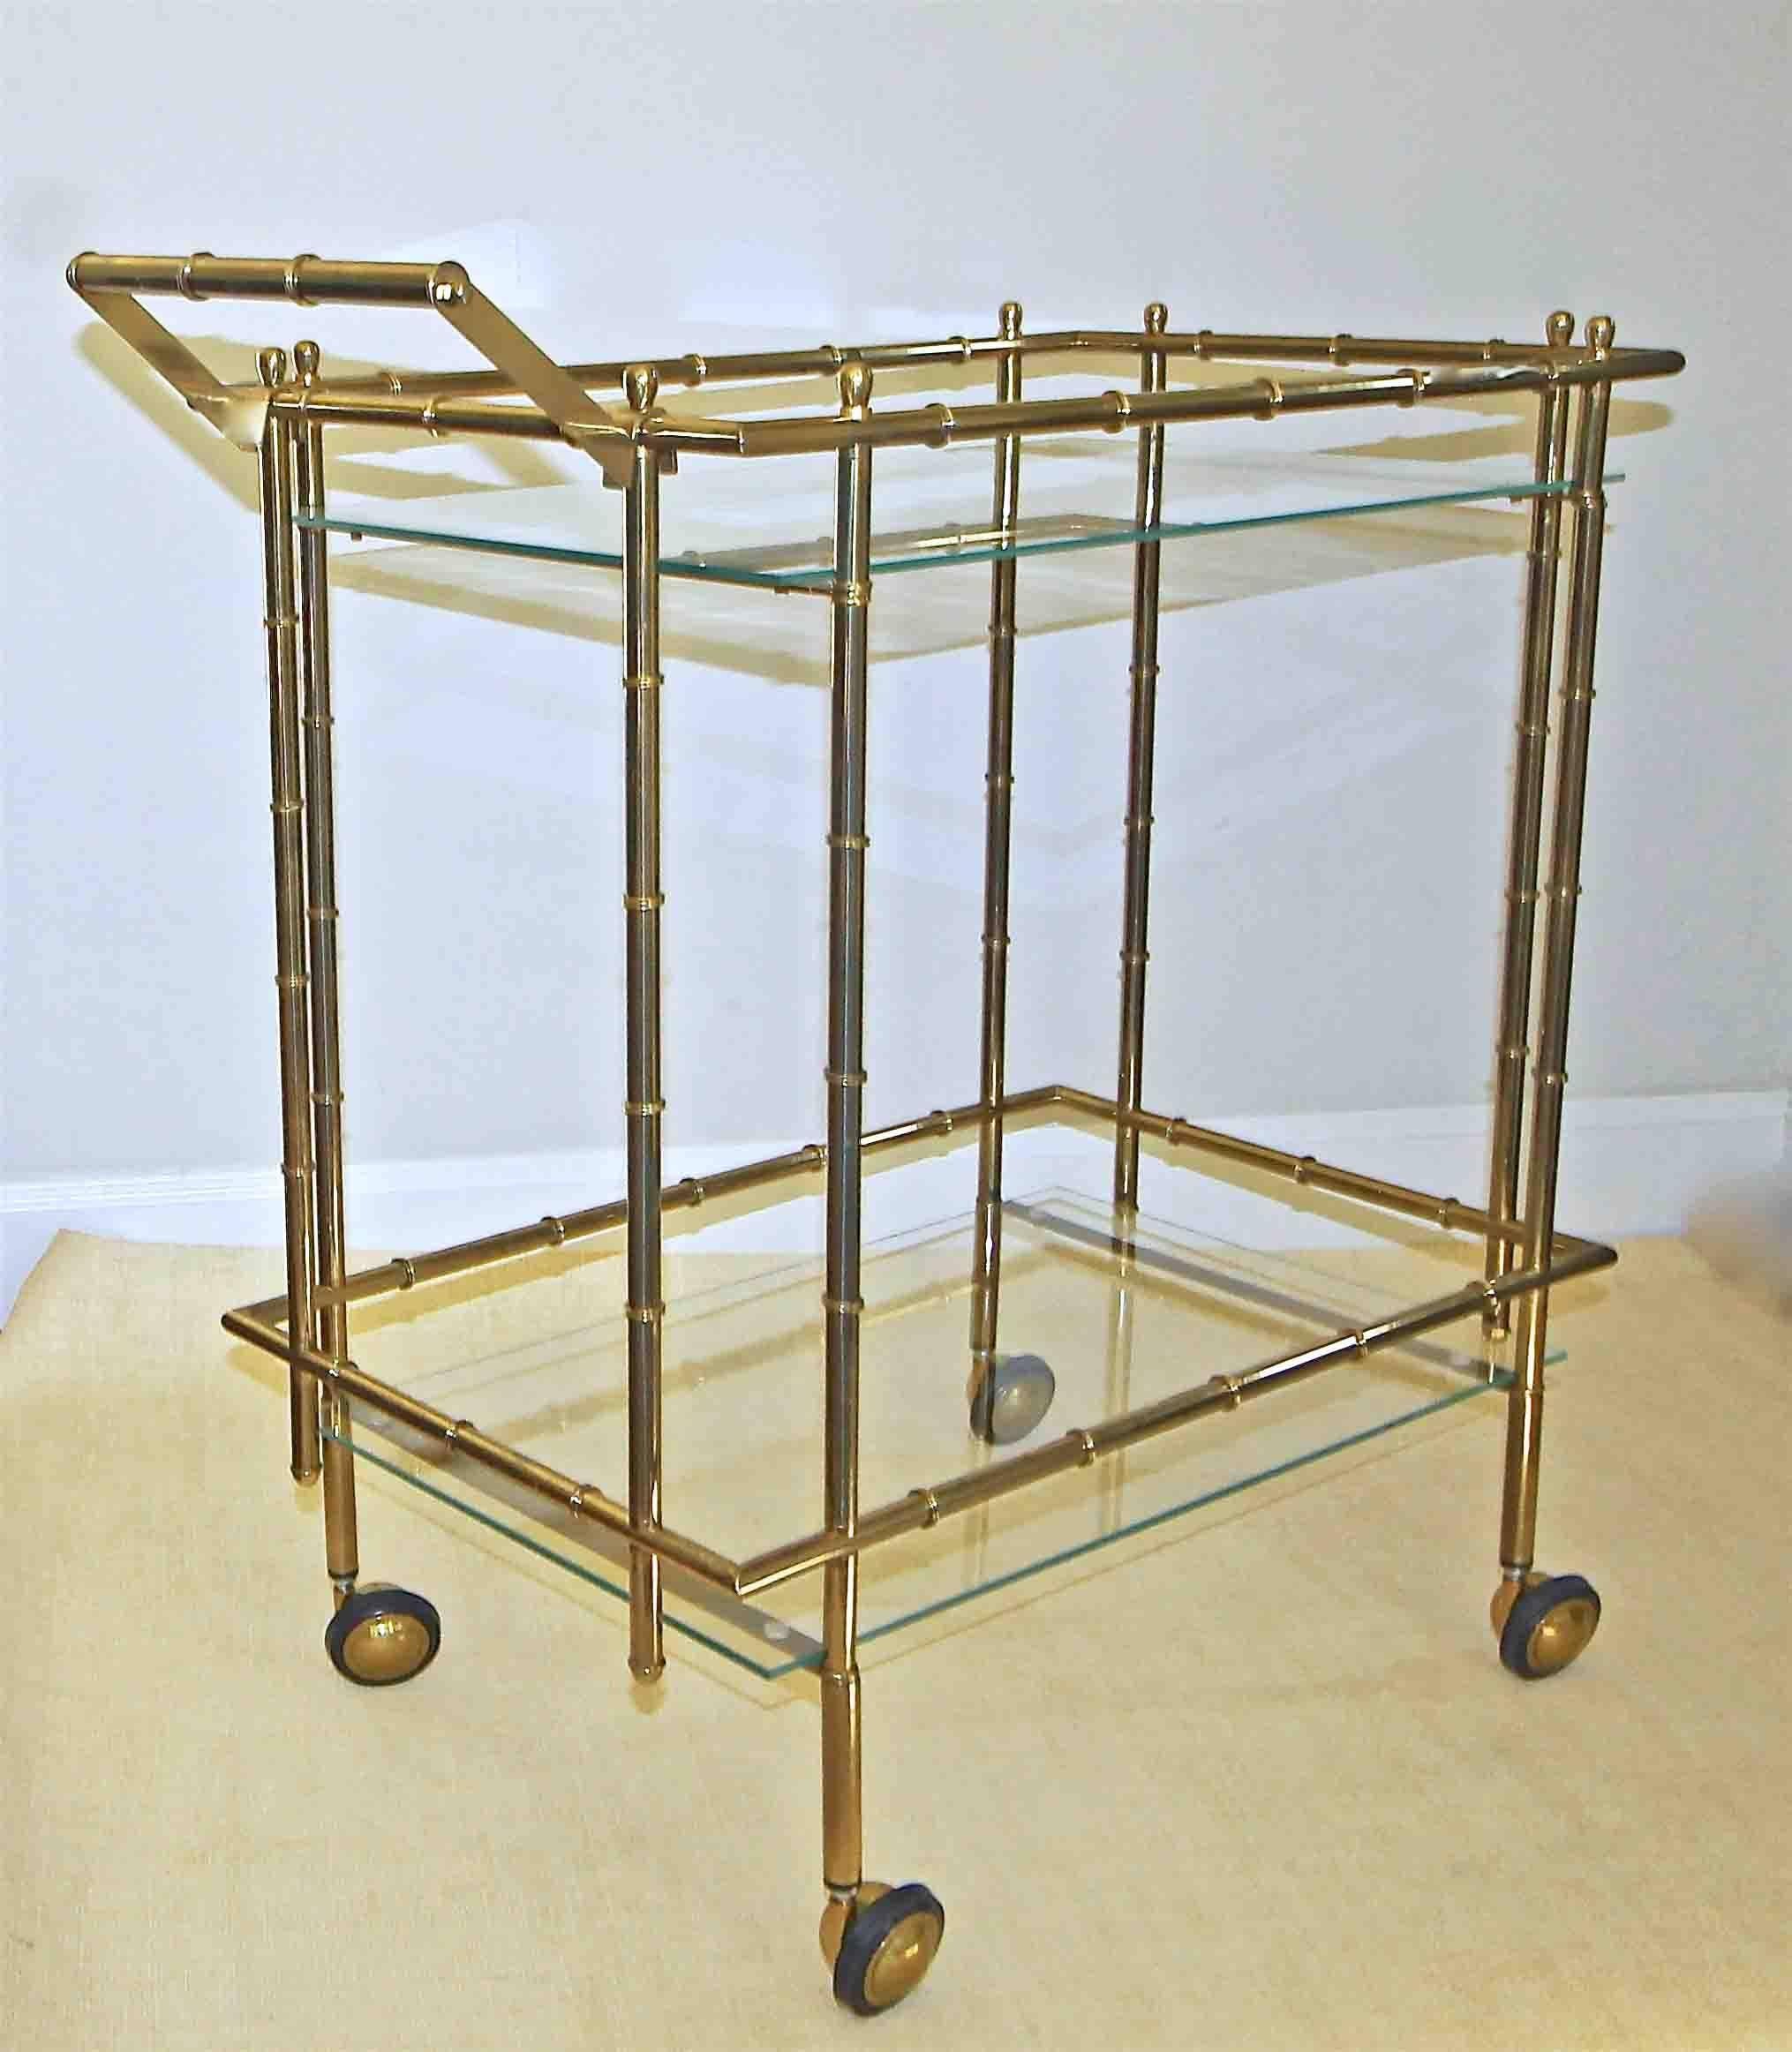 Nice scale two-tier faux brass bamboo bar cart, with glass inset shelves resting on caster wheels.

This item is located at our Dallas showroom.